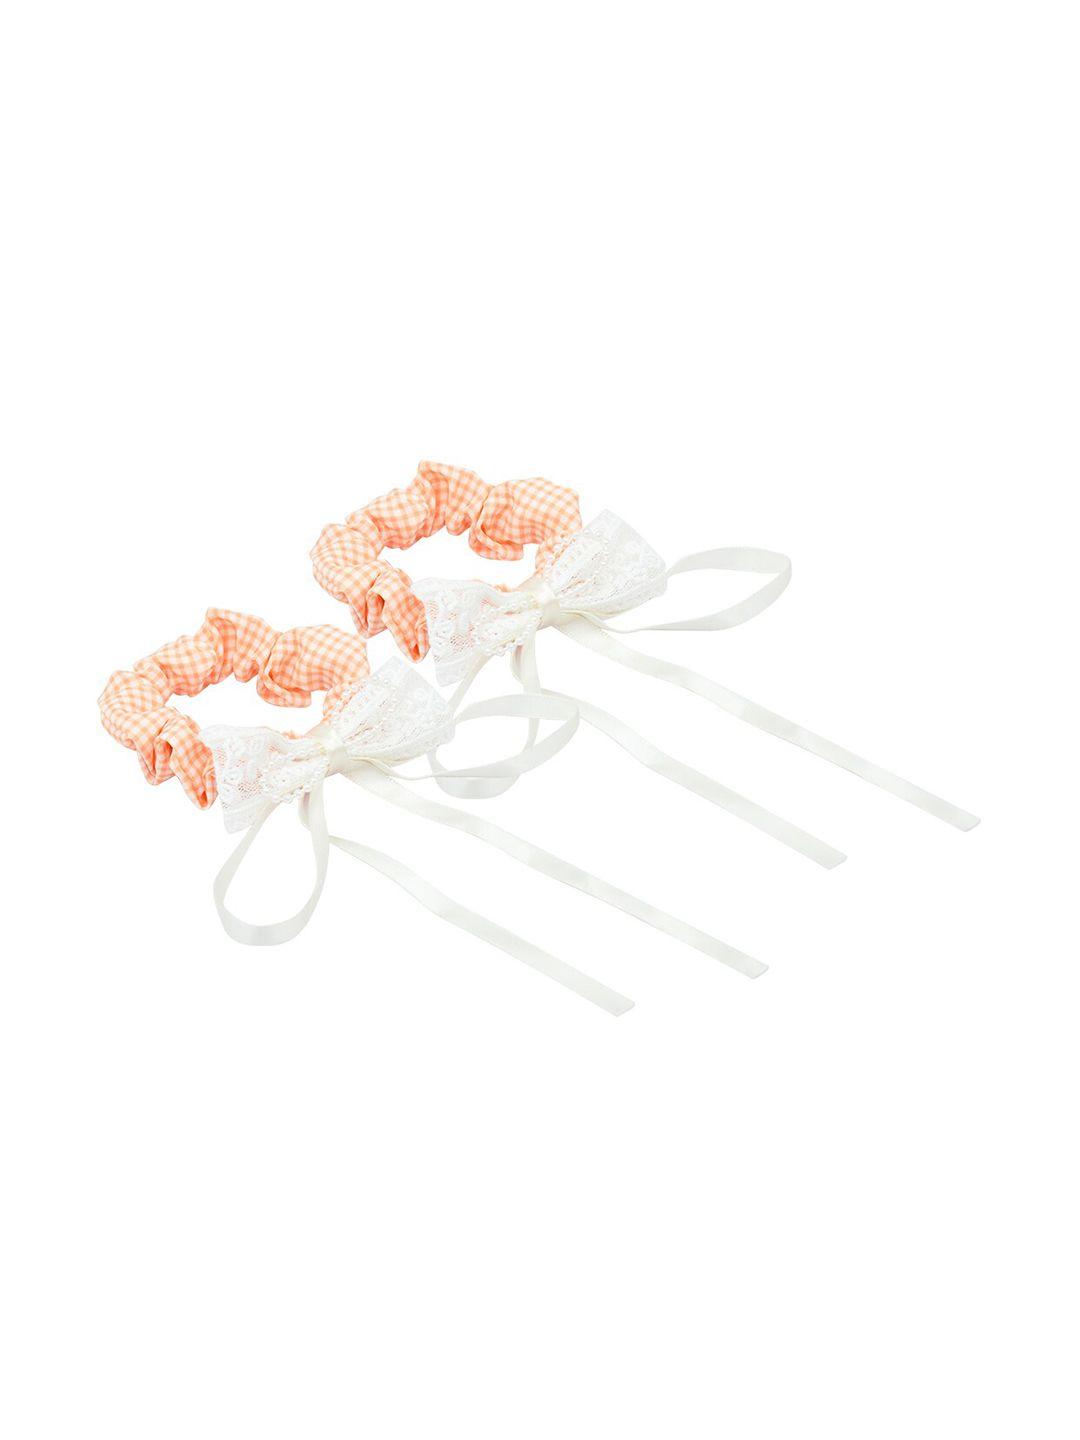 funkrafts-girls-peach-coloured-&-white-set-of-2-lace-hair-accessory-set